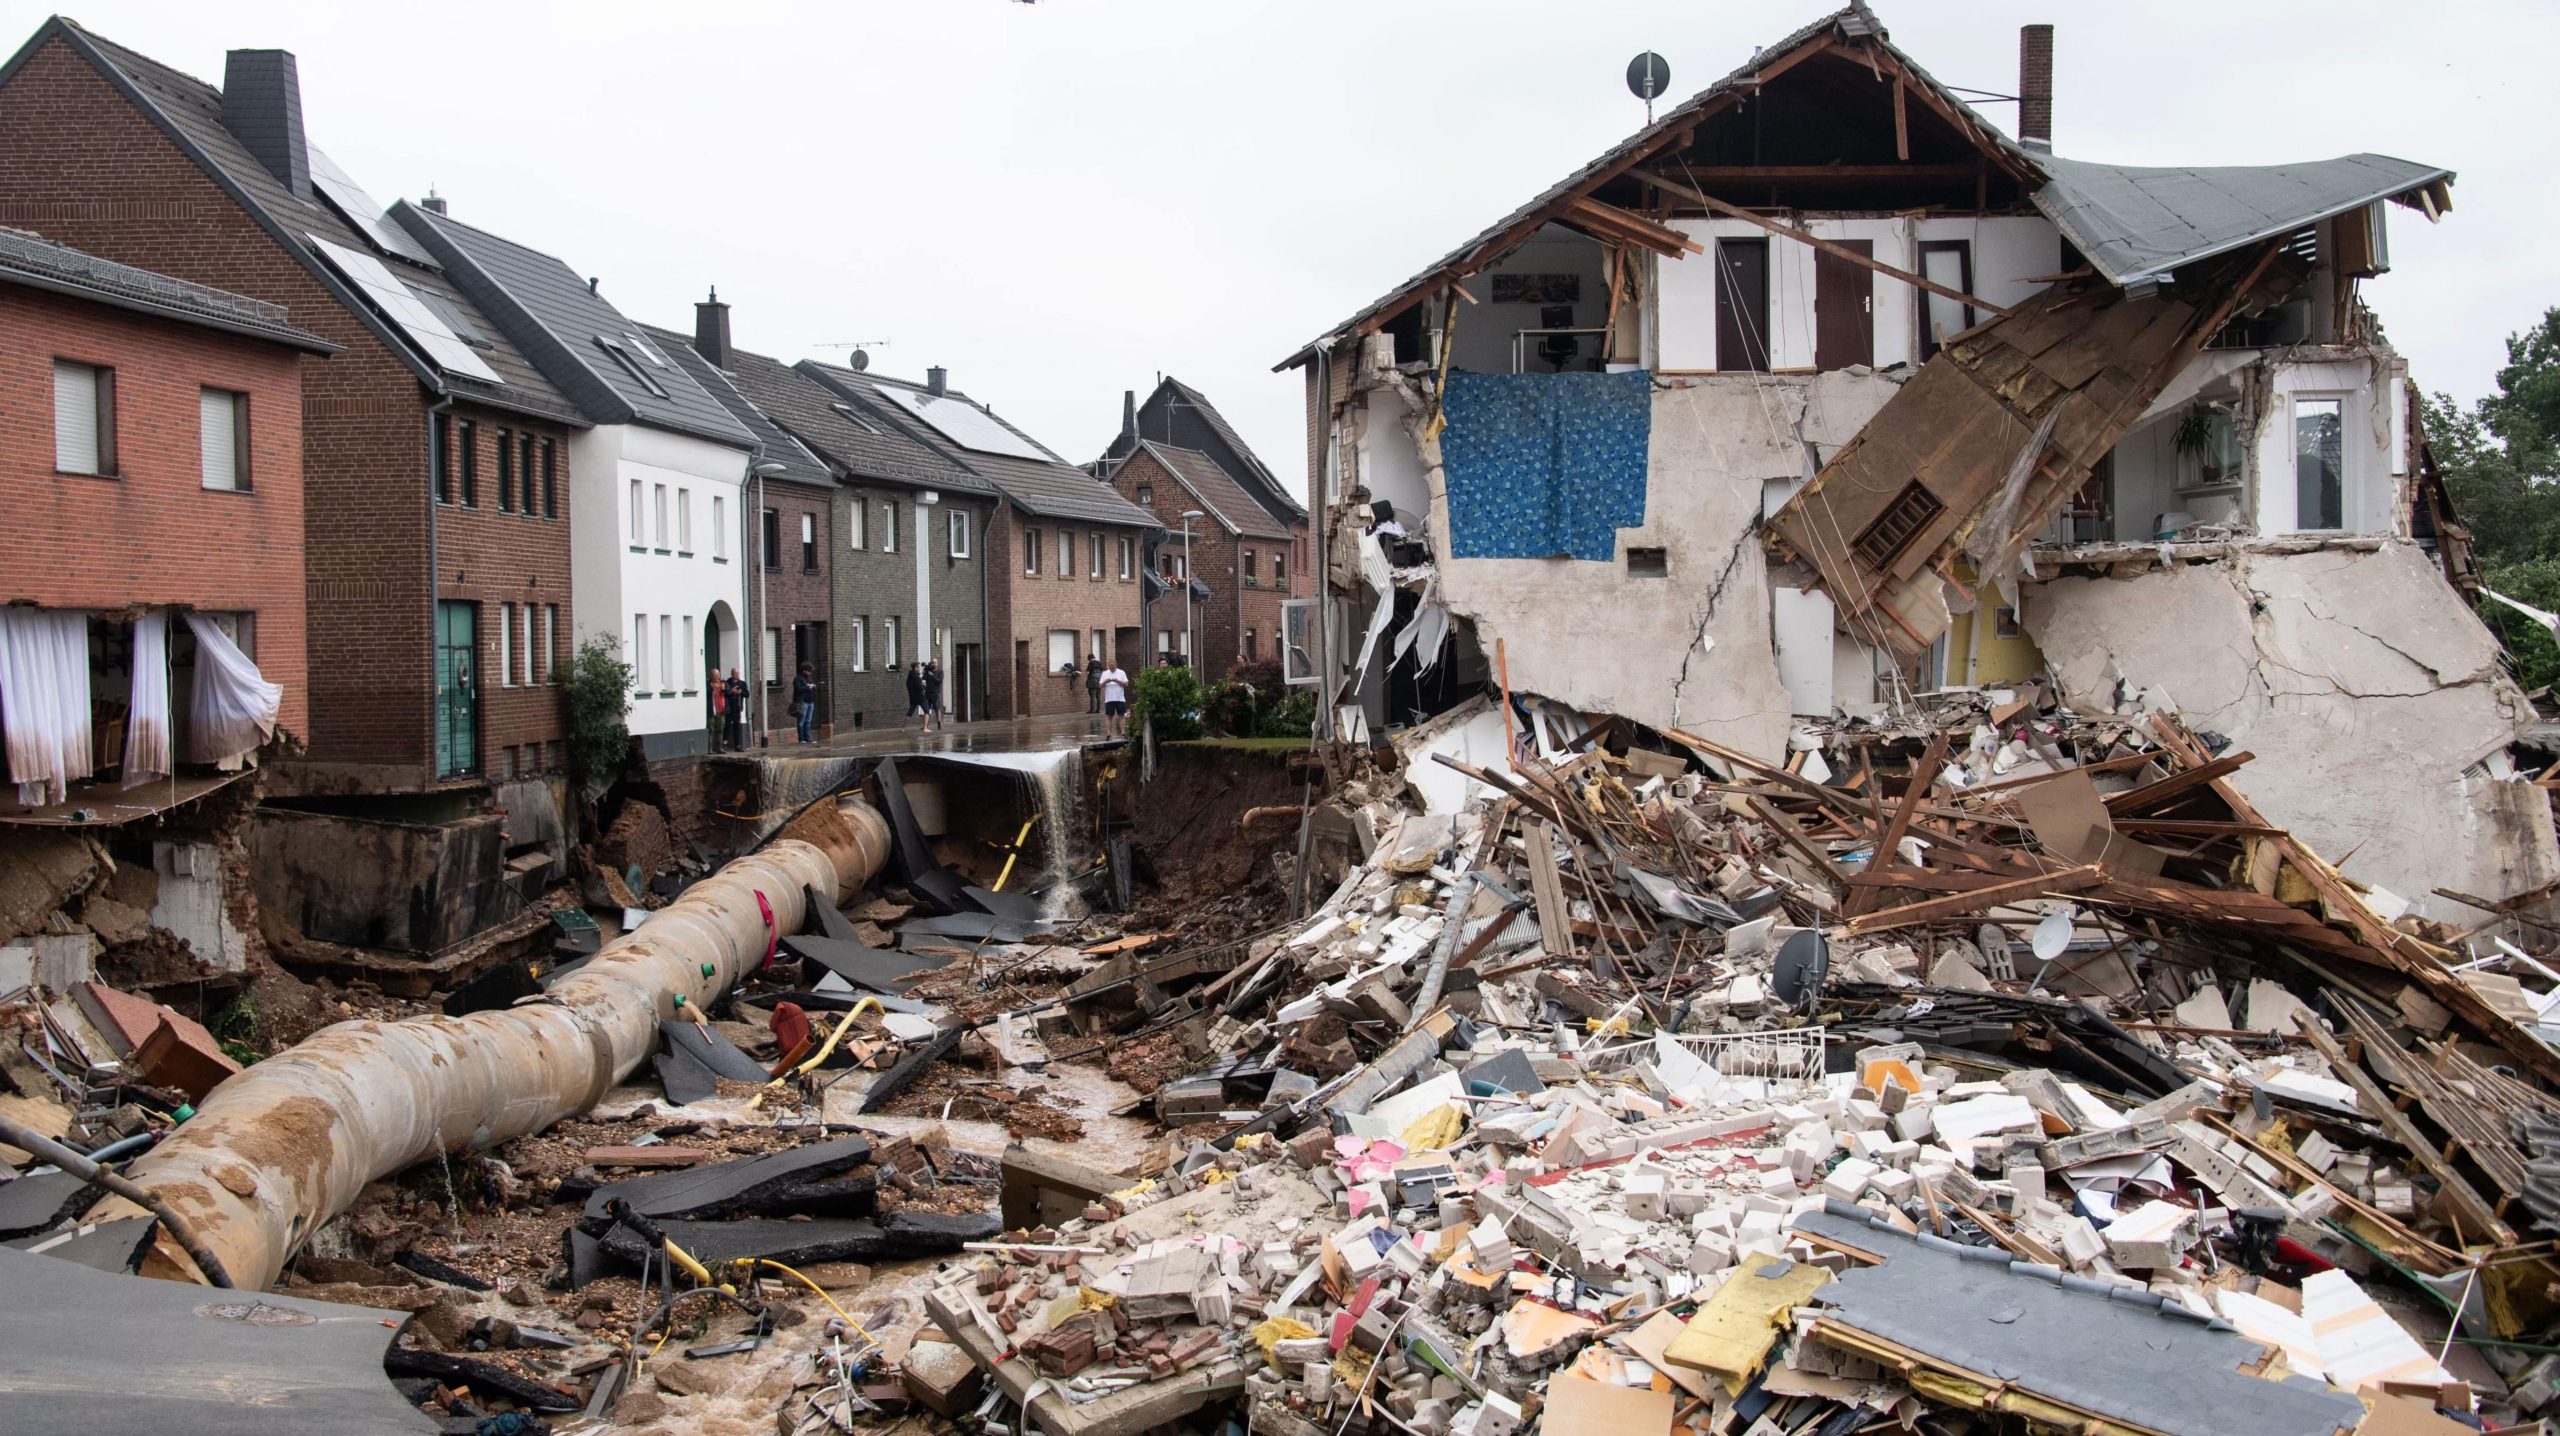 An area completely destroyed by floods in the Blessem district of Erftstadt, western Germany on July 15. (Photo: Sebastien Bozon/AFP, Getty Images)